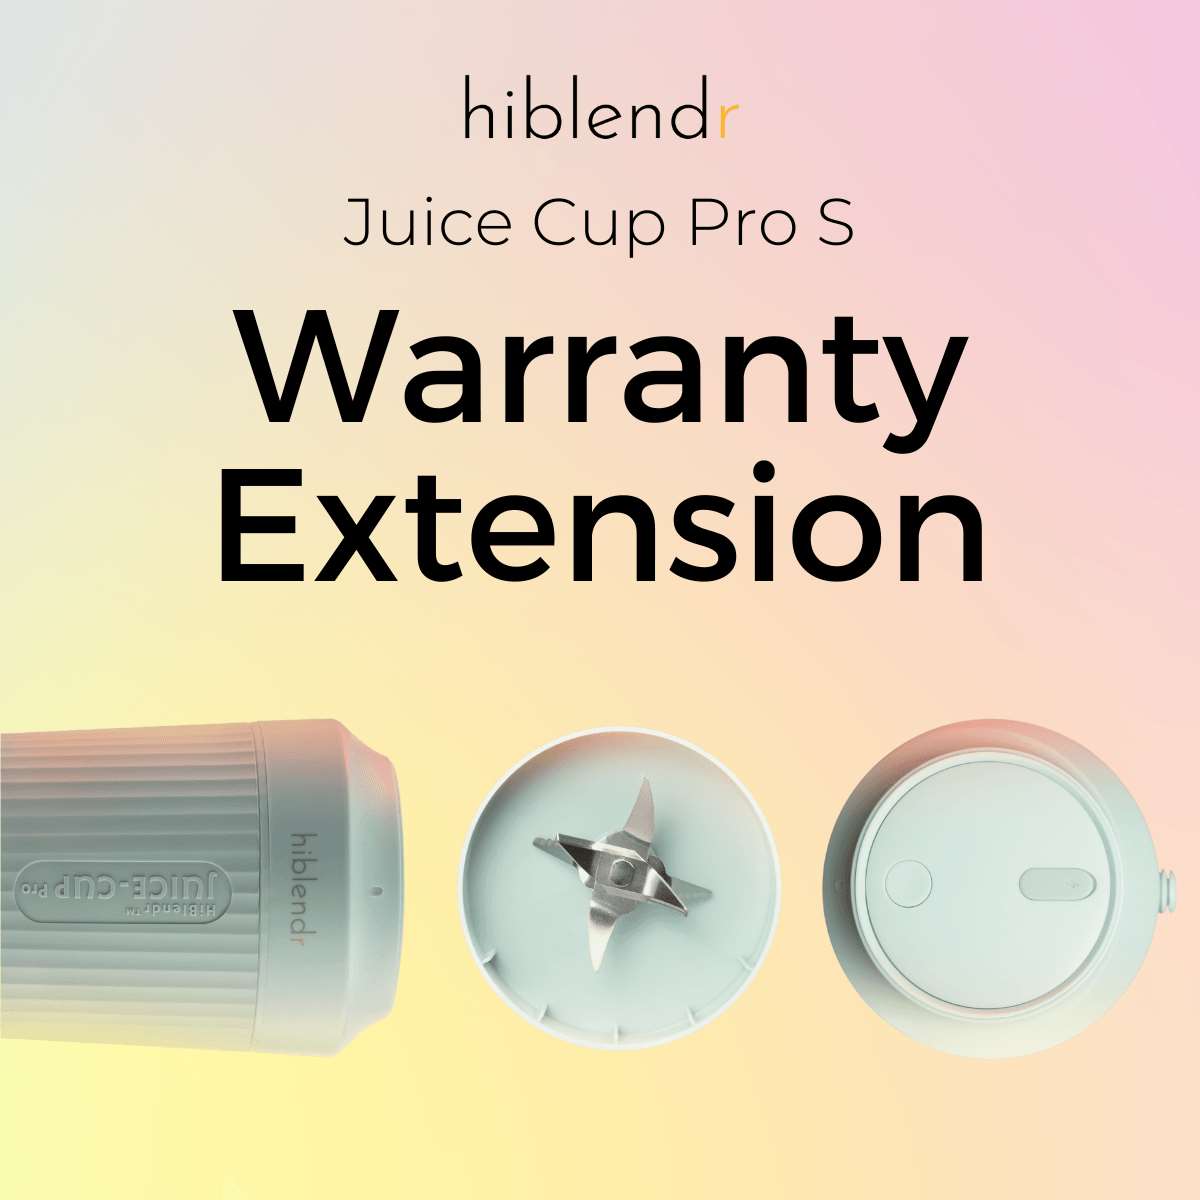 HiBlendrCare+ Warranty Extension (for JCP S) - HiBlendr MY